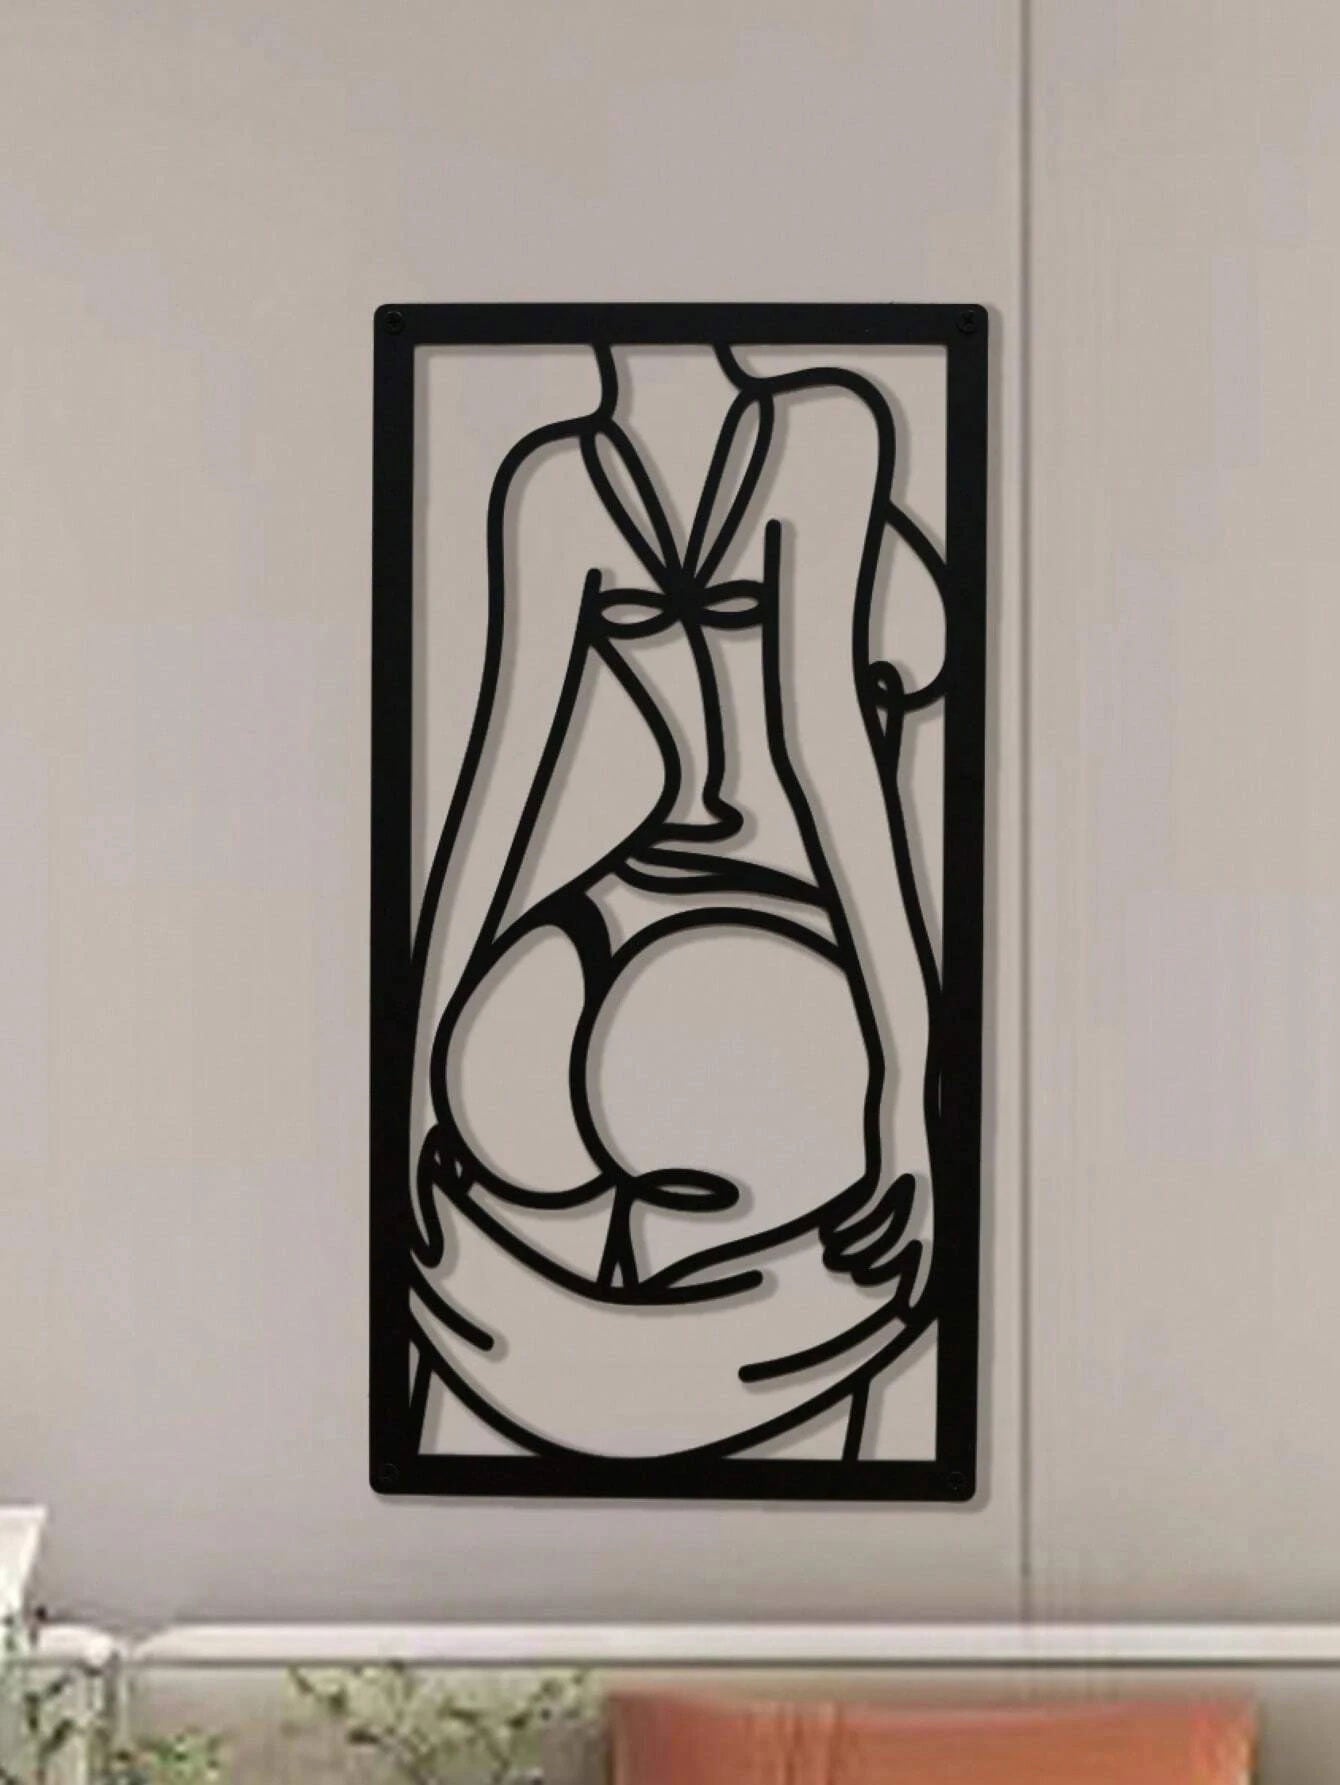 A Beautiful Woman With Half-covered, Half-exposed Body And Curled Buttocks, Metal Wall Art